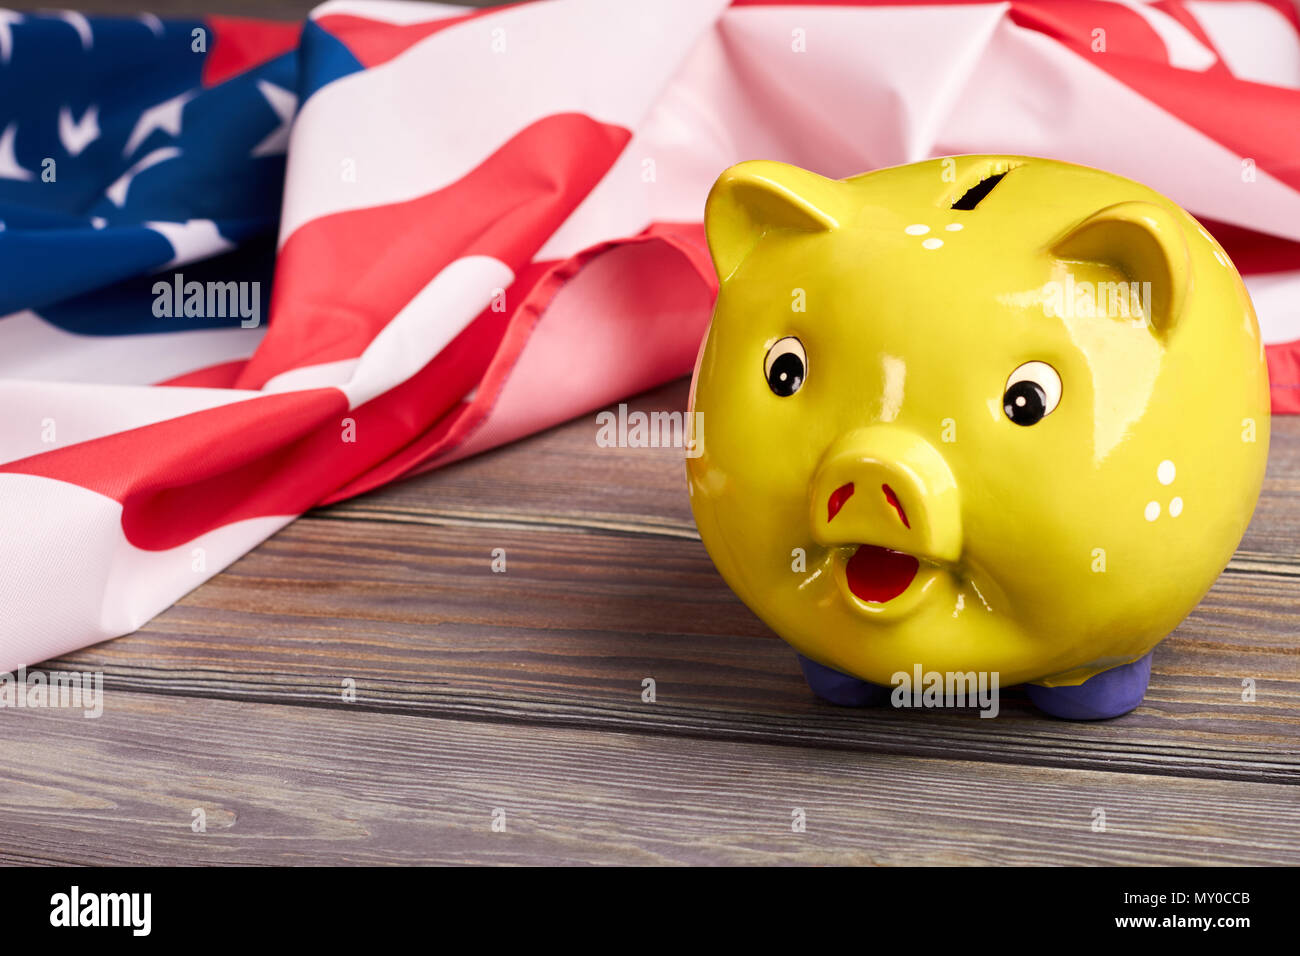 Close up yellow piggy bank and USA flag. American national flag and money box on wooden background. Budget and savings. Stock Photo